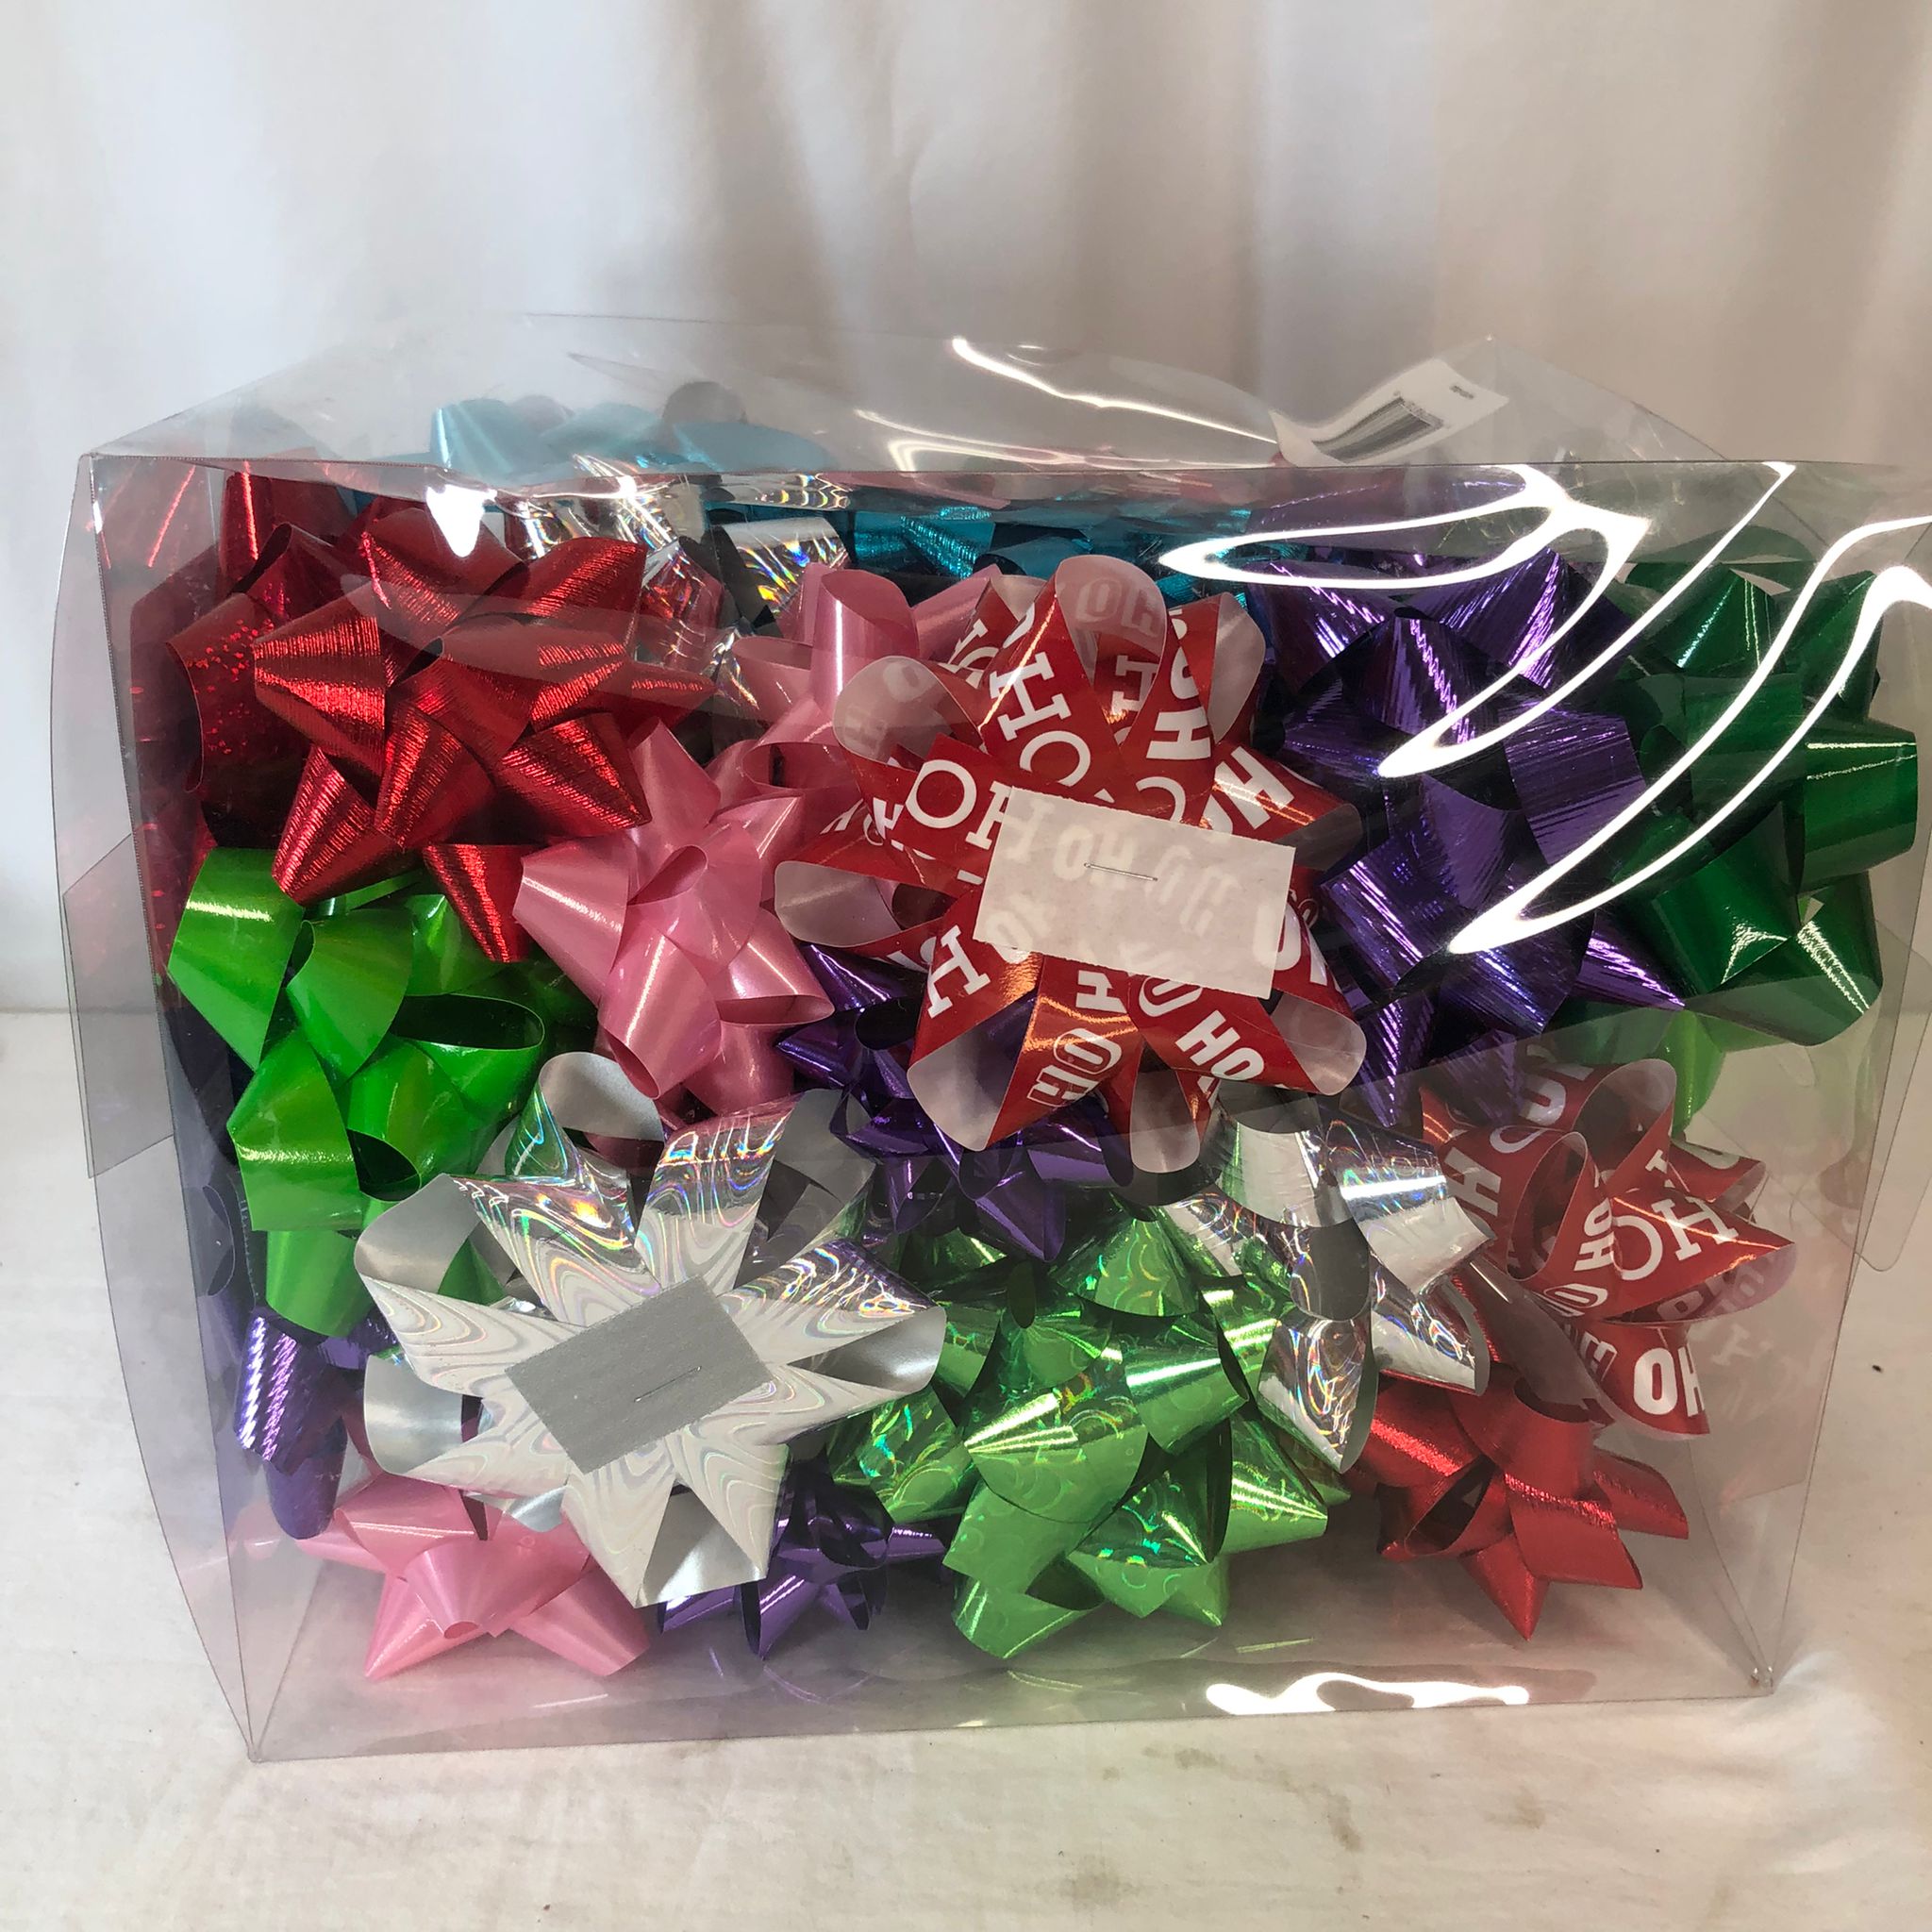 Kirkland Signature Gift Bows in Traditional or Bright Colours - 50 Pack